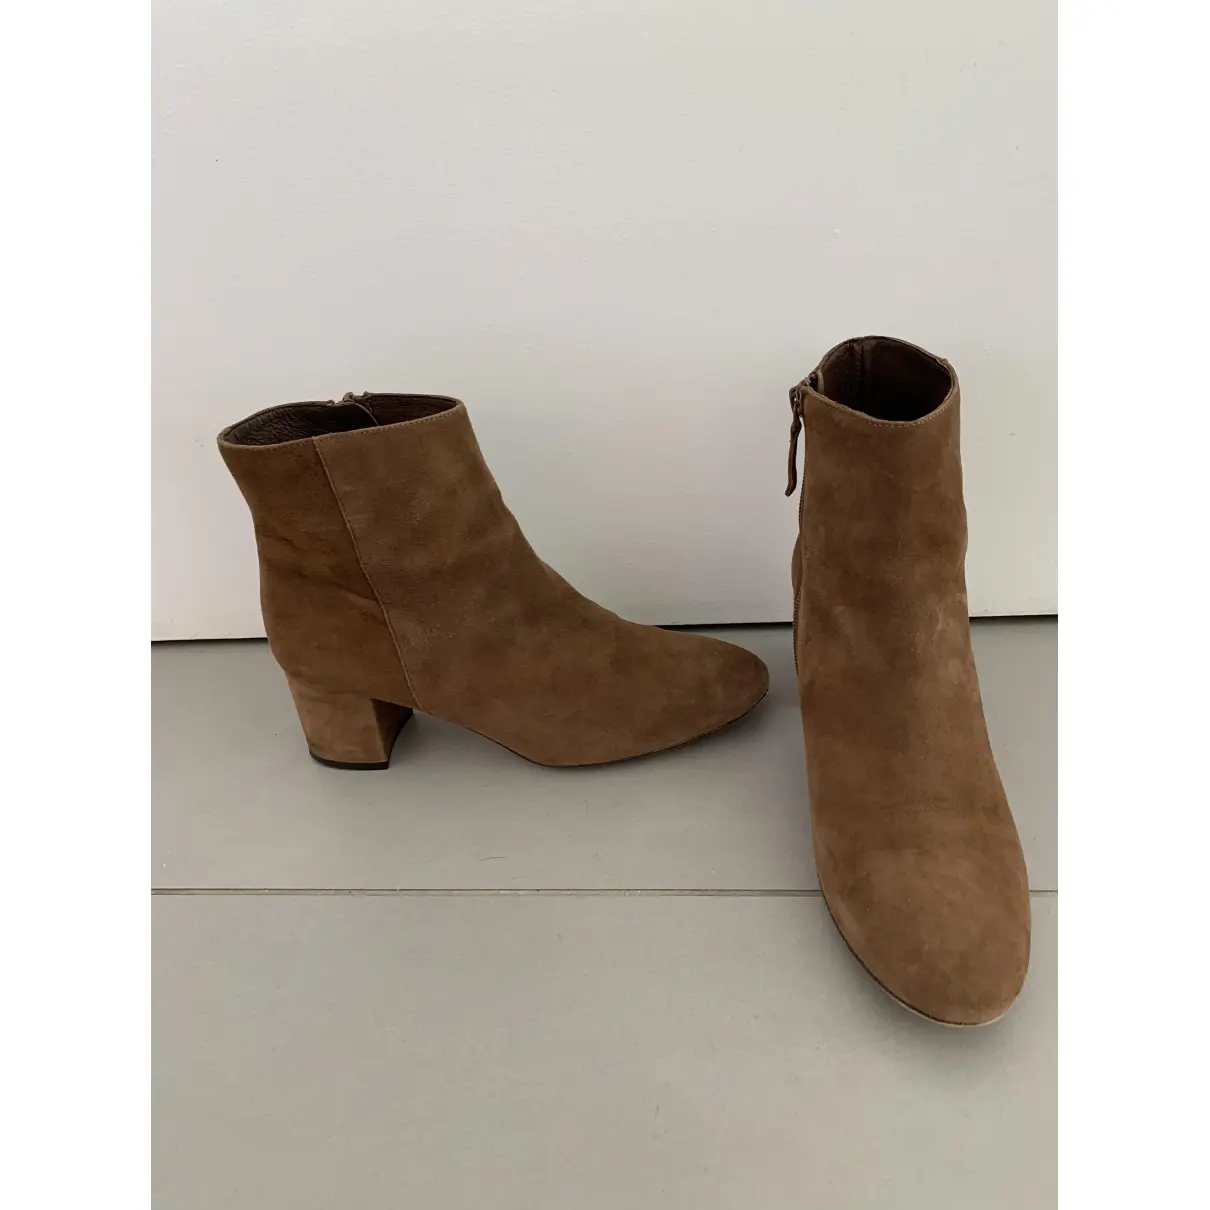 J.Crew Ankle boots for sale